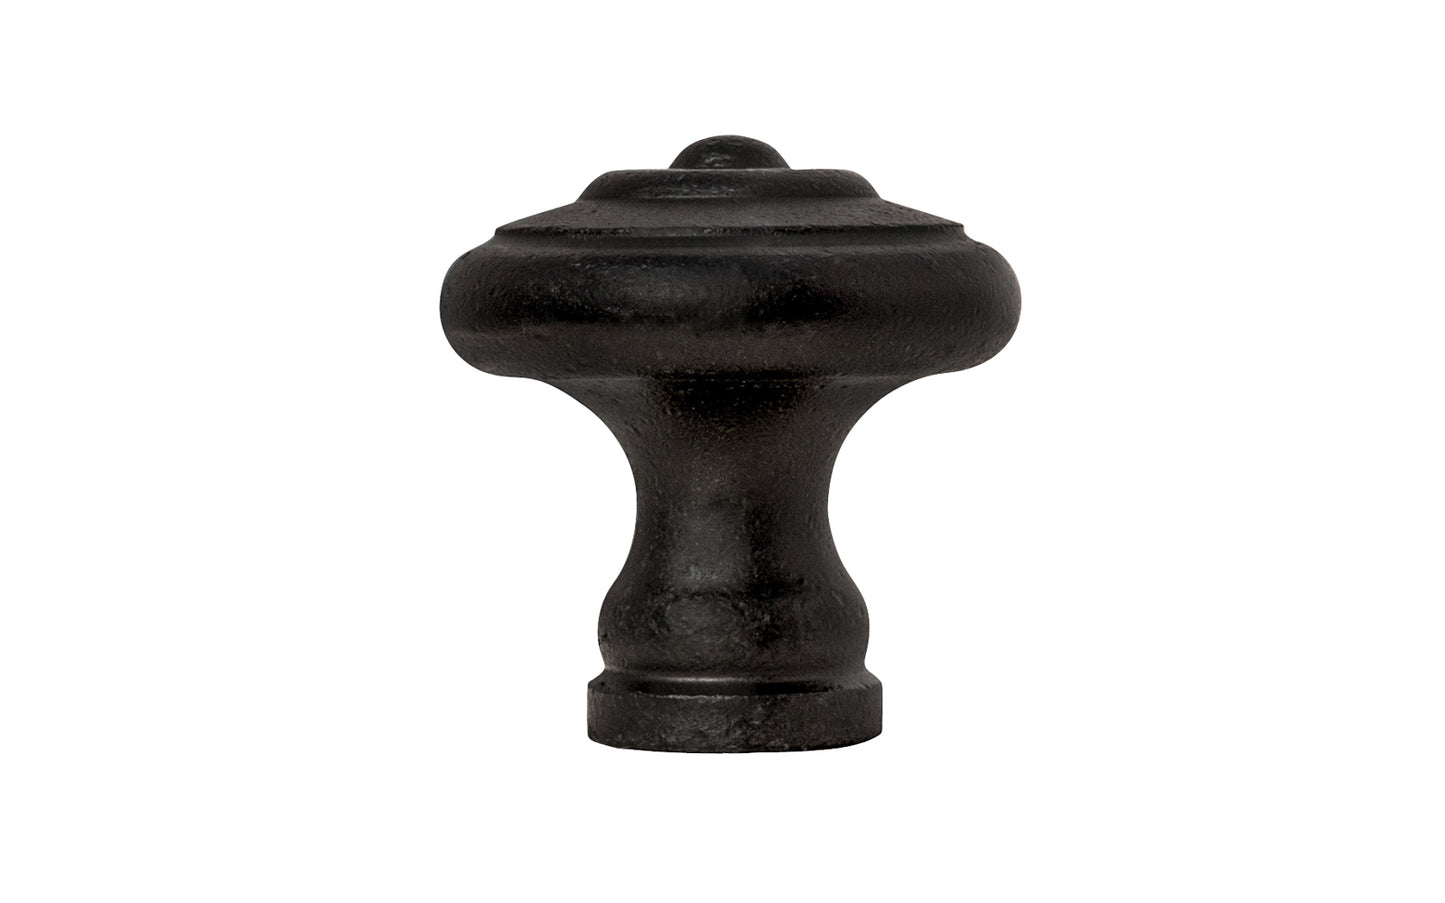 Satin Black Mid-Century Style Cast Iron Knob. Designed in the Mid-Century Style of hardware, but the knob will fit with any time period up to the current modern styles. Made of cast iron material. The knob works well in kitchens, bathrooms, on furniture, cabinets, drawer. Available in 1-3/16 & 1-3/8" size knobs. 